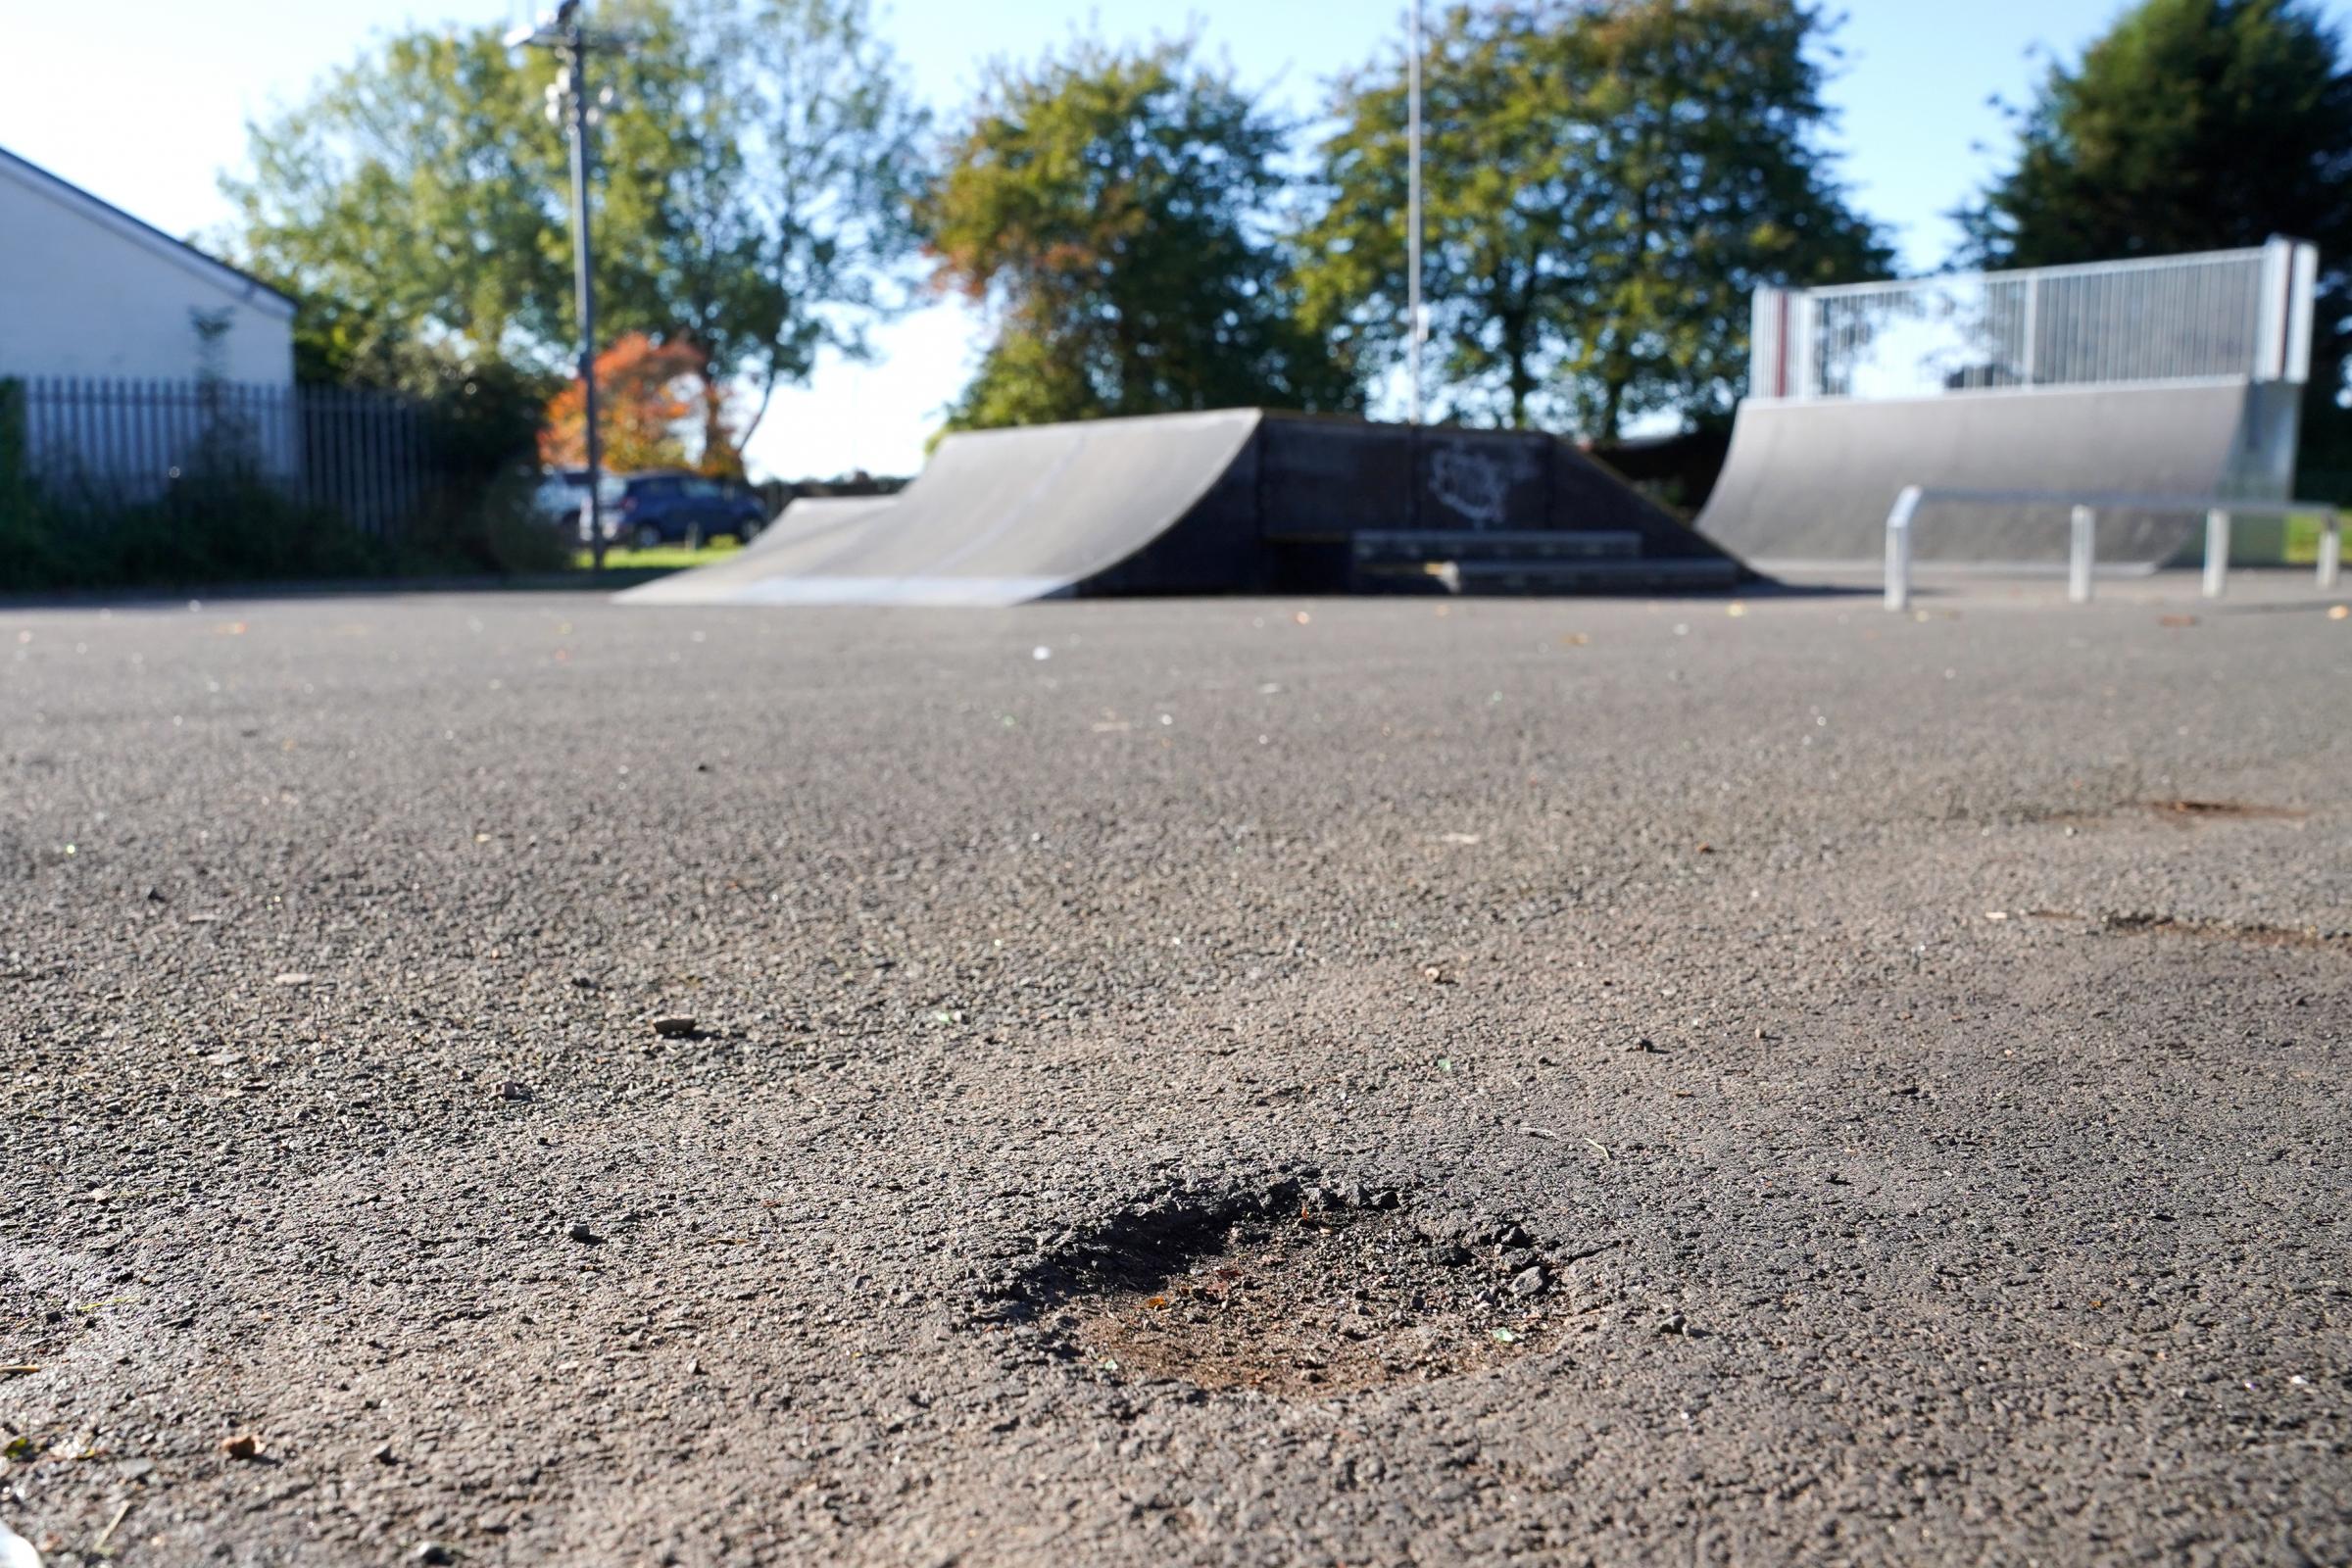 The project has caused damage to the surface at Ledbury skatepark after the revamp.